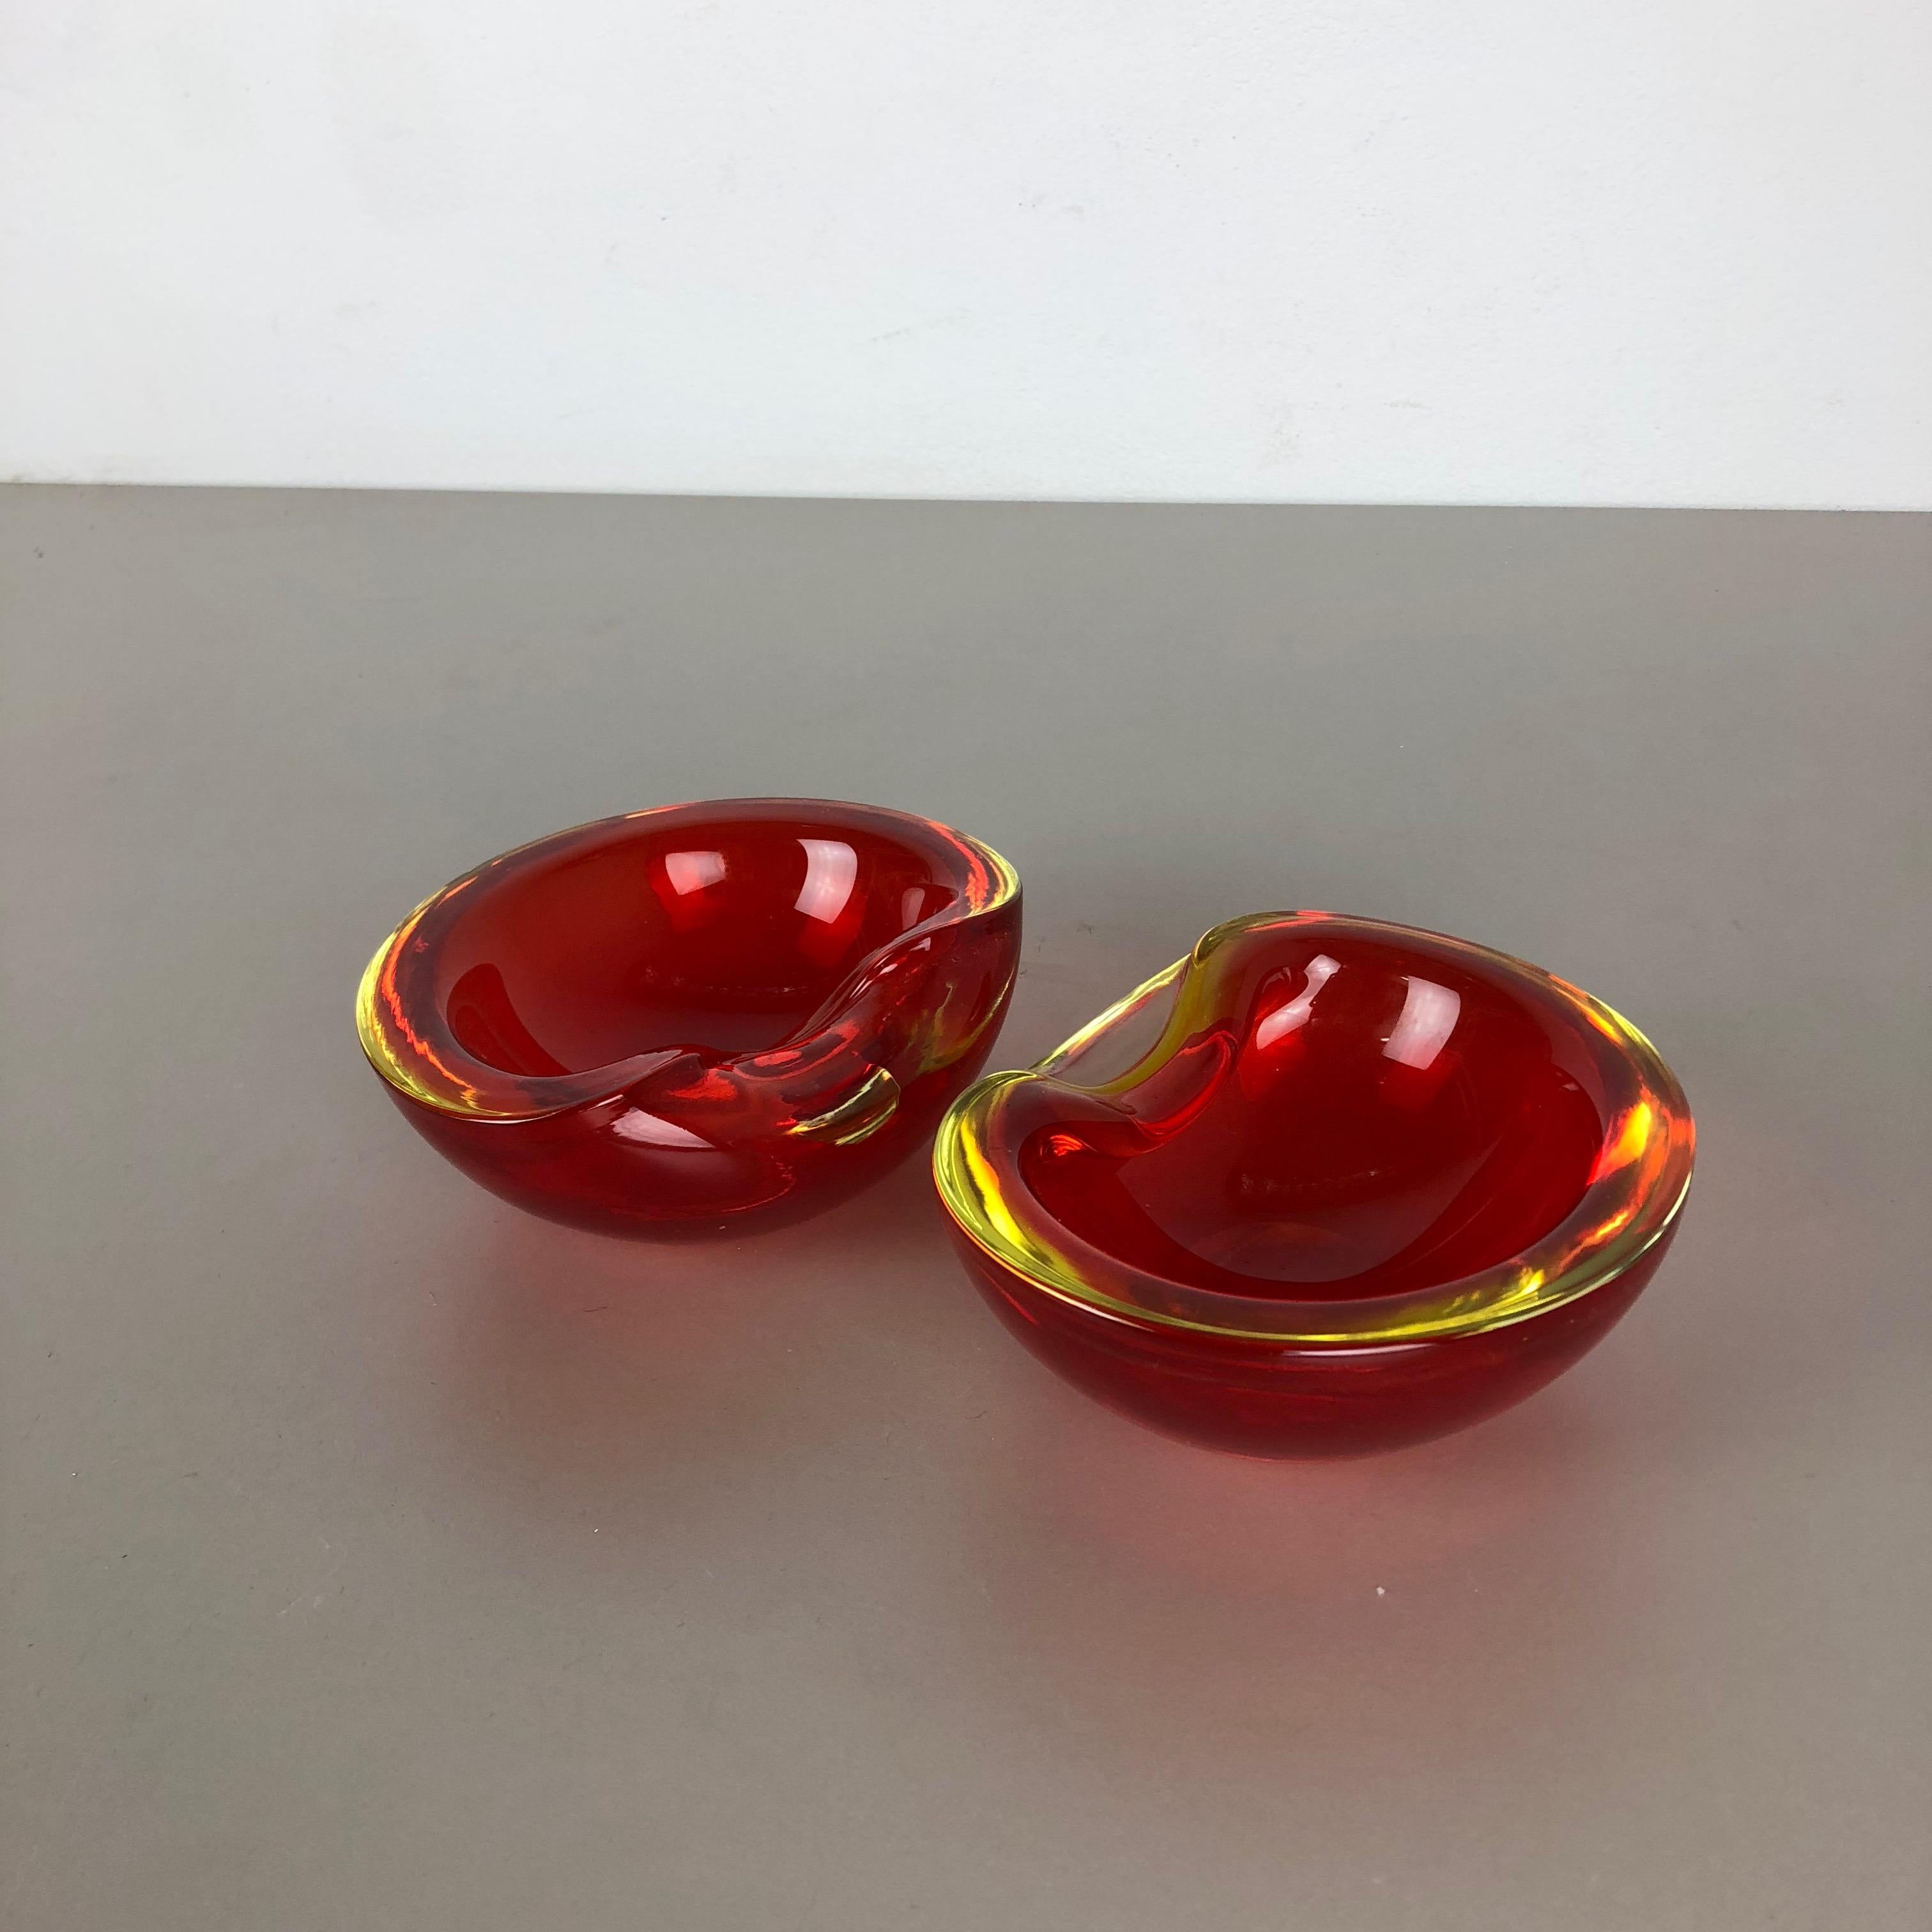 Article:

Murano glass bowl set of 2



Producer:

Cenedese Vetri (marked underneath the bowl)


Origin:

Murano, Italy


Decade:

1960s-1970s


This original glass bowl set was produced in the 1960s-1970s in Murano, Italy. It